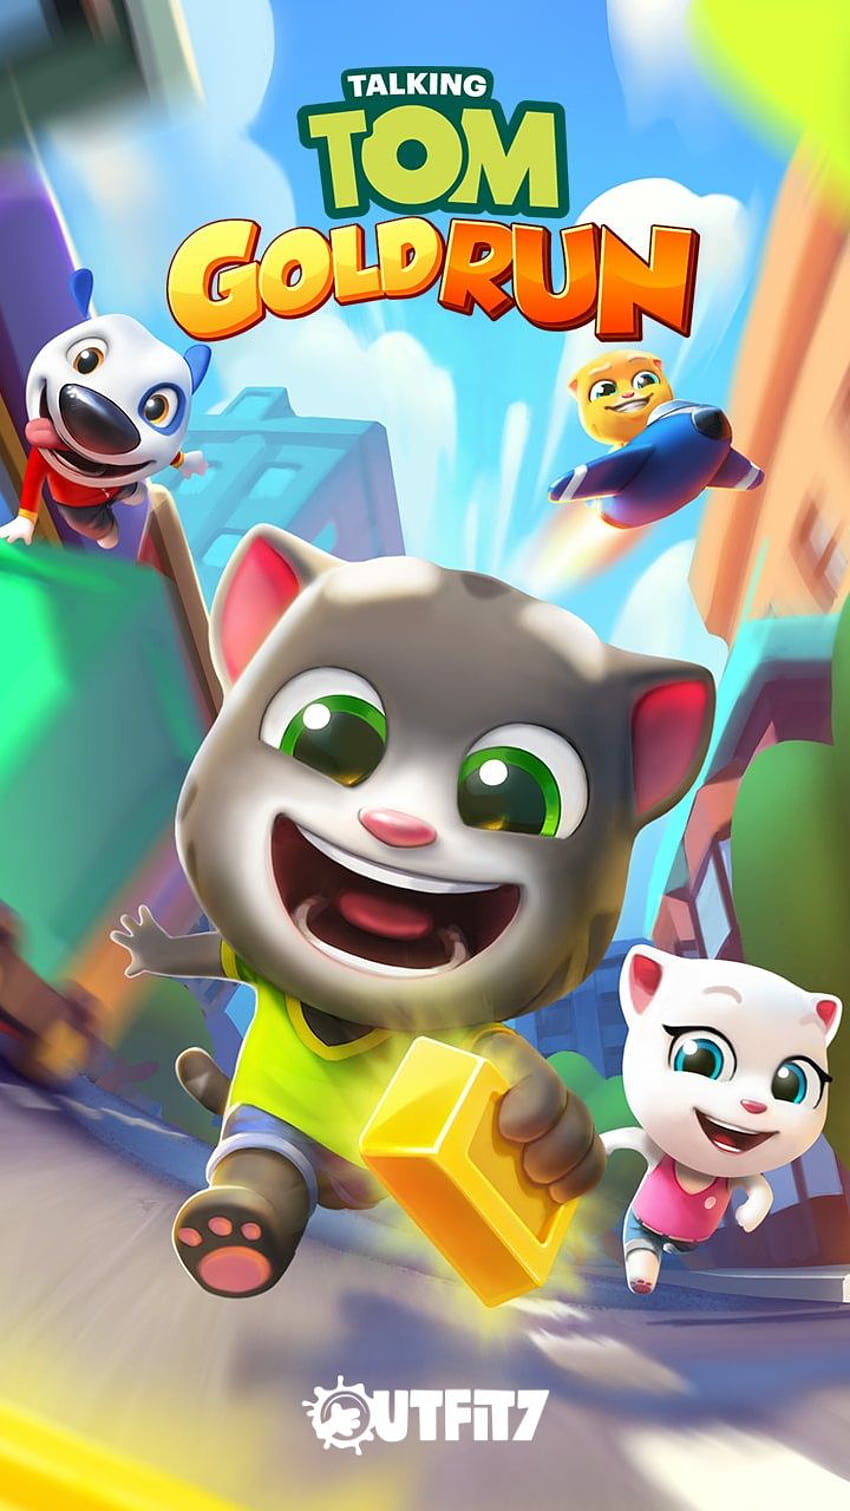 My Talking Angela posted by Christopher Cunningham, talking tom gold run HD phone wallpaper